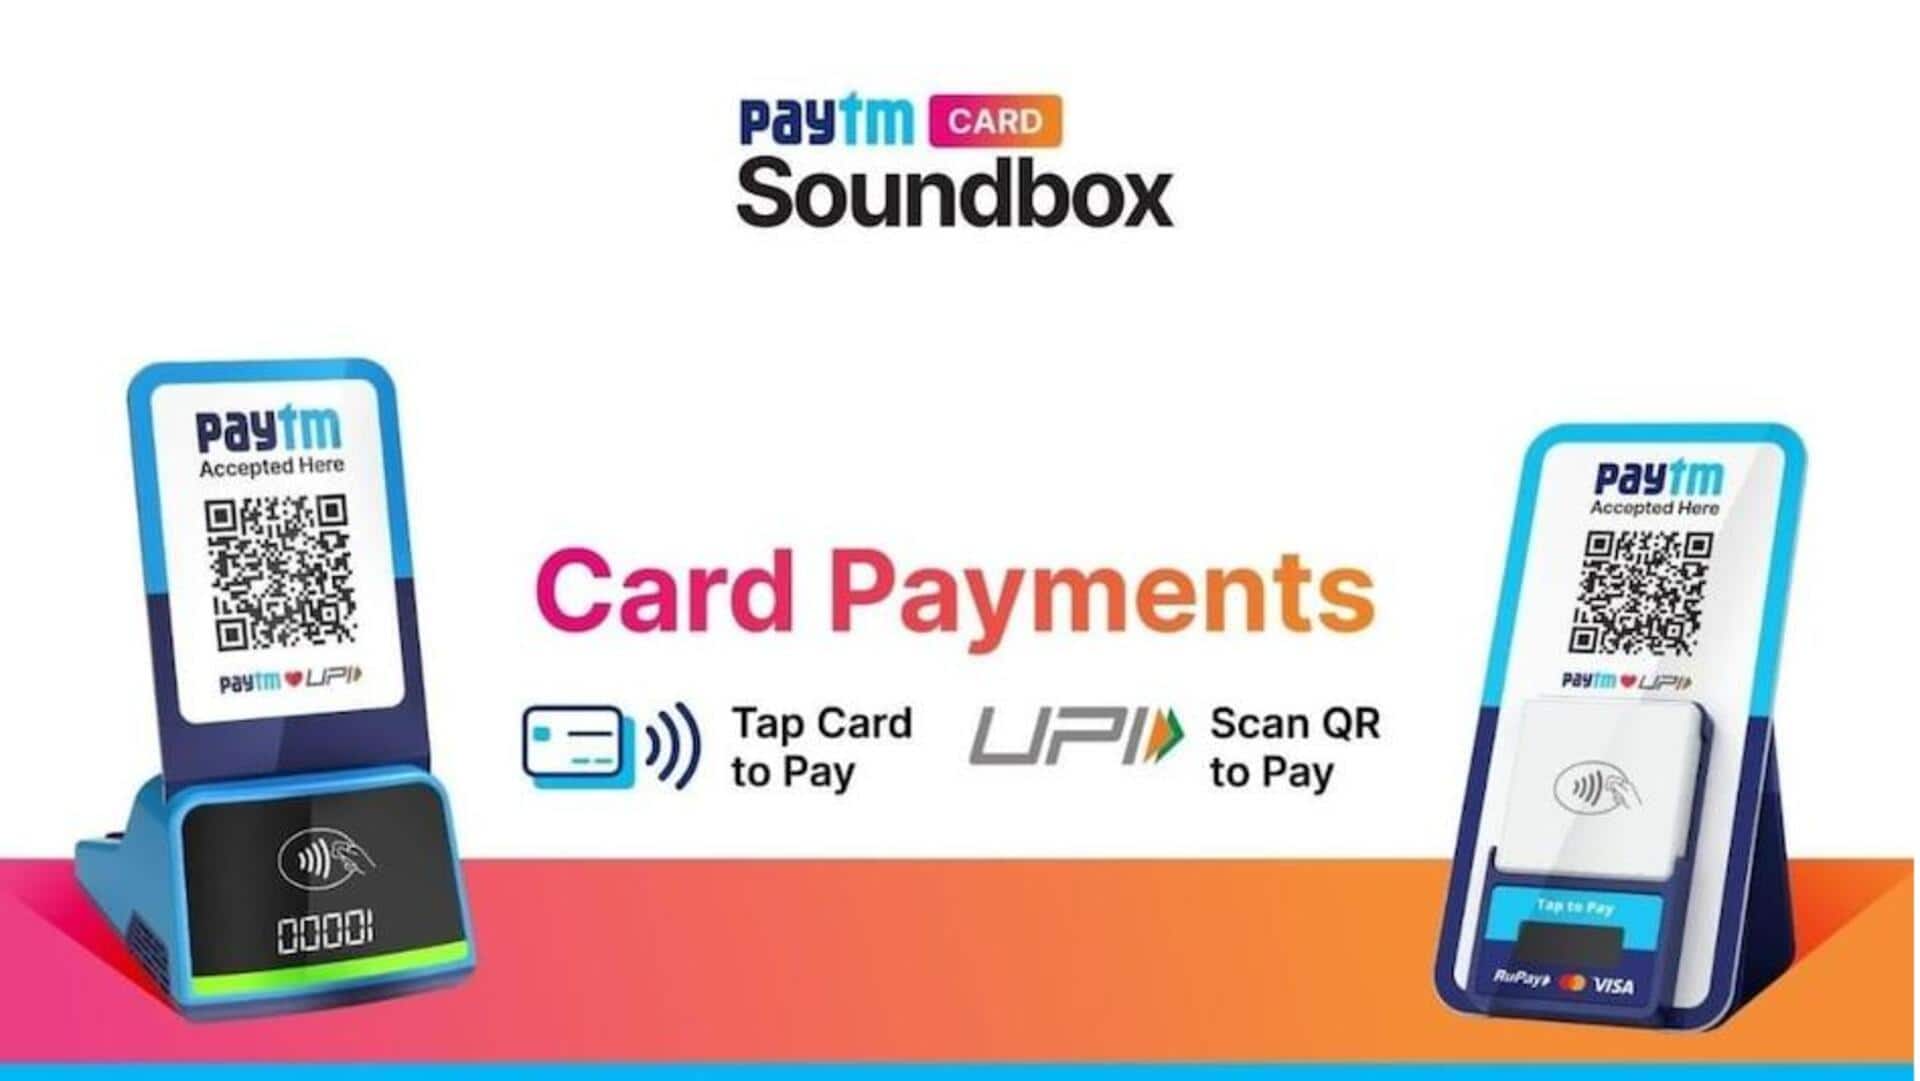 Paytm introduces Card Soundbox for merchants: Here's how it works